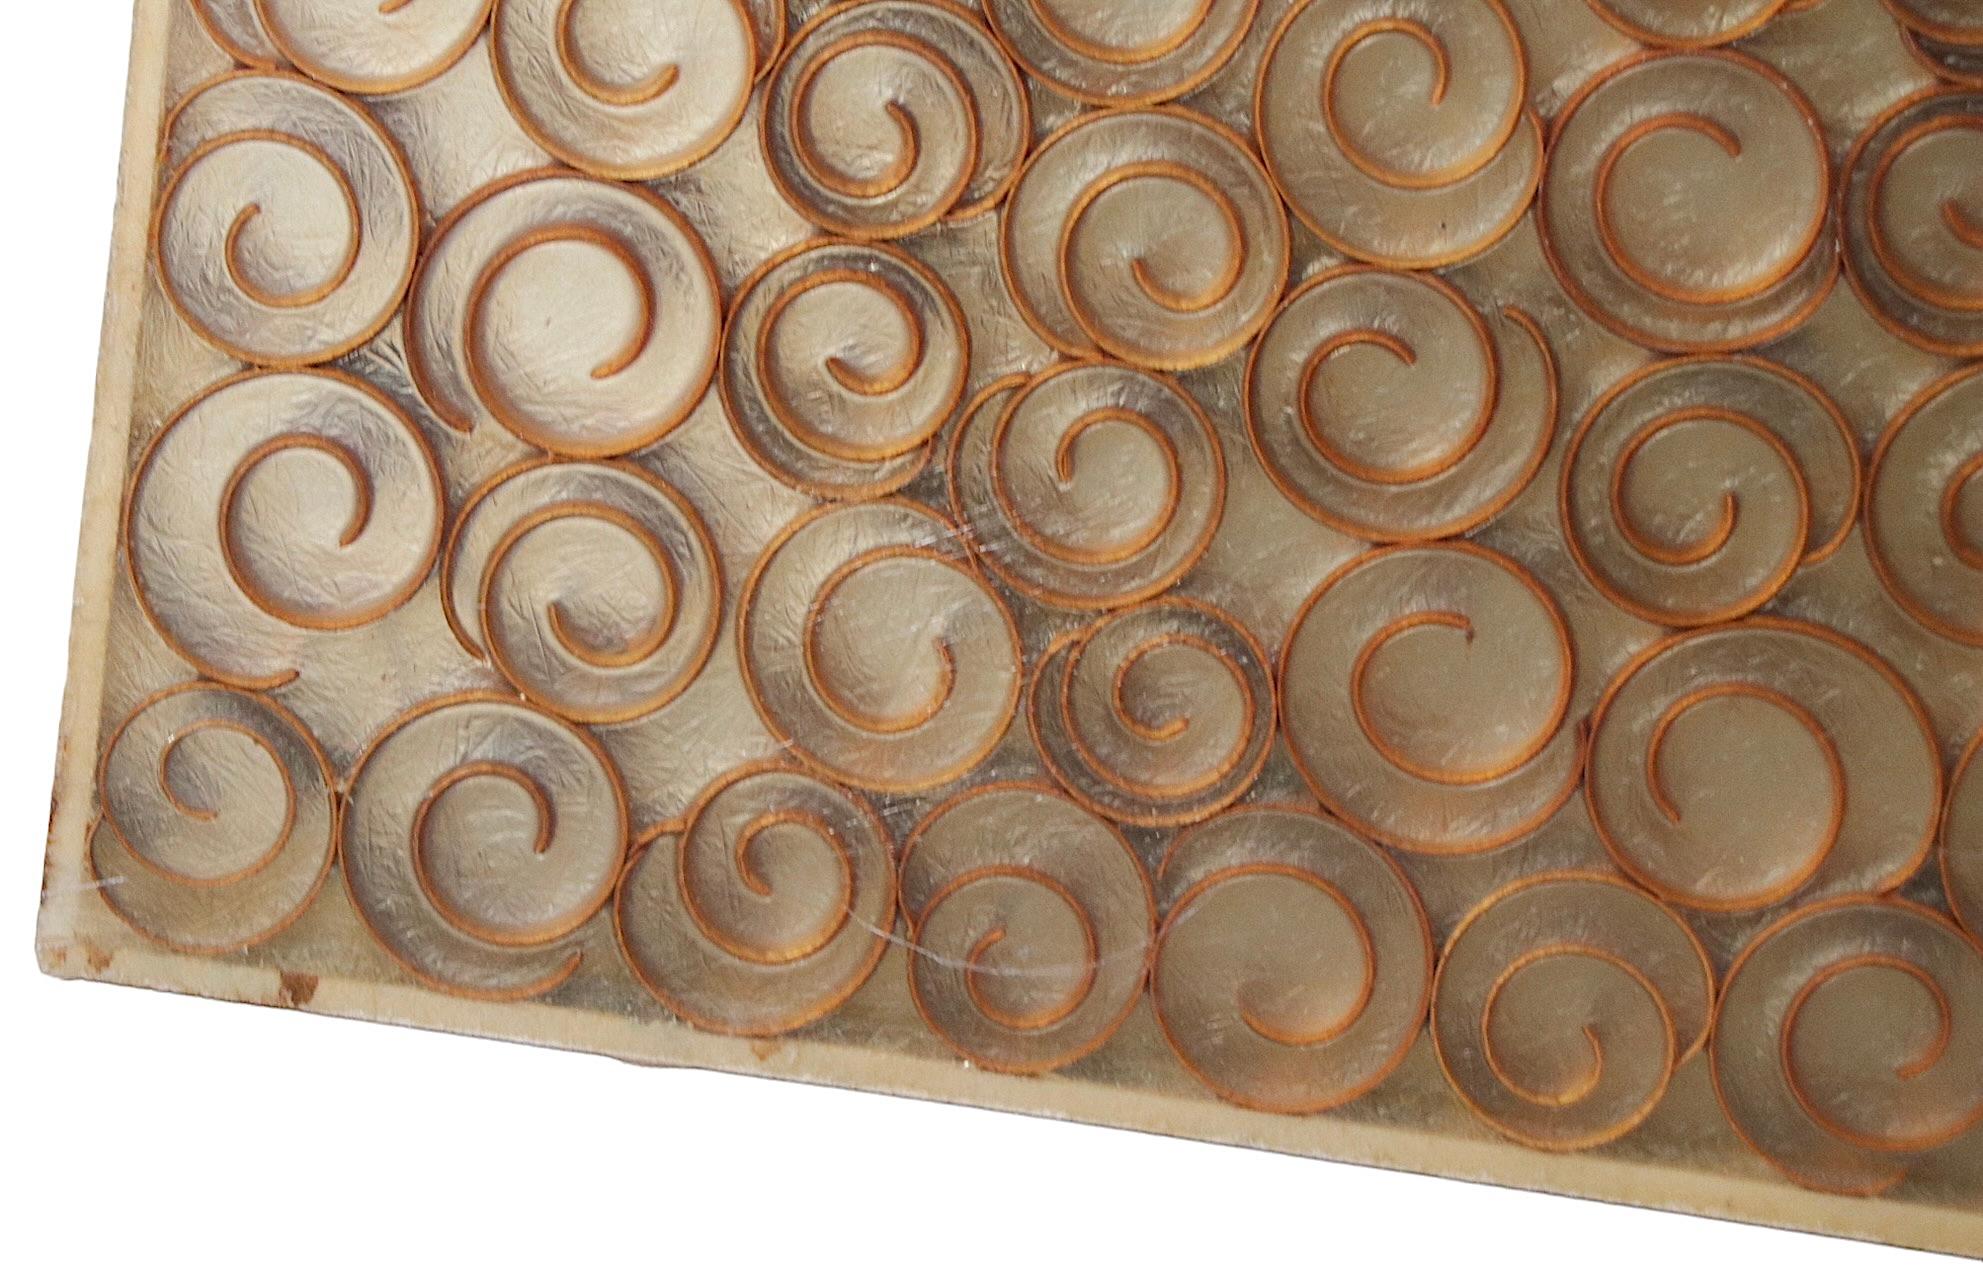 Modernist Translucent Architectural Panel with Repeating Curlicue Field Motif For Sale 1